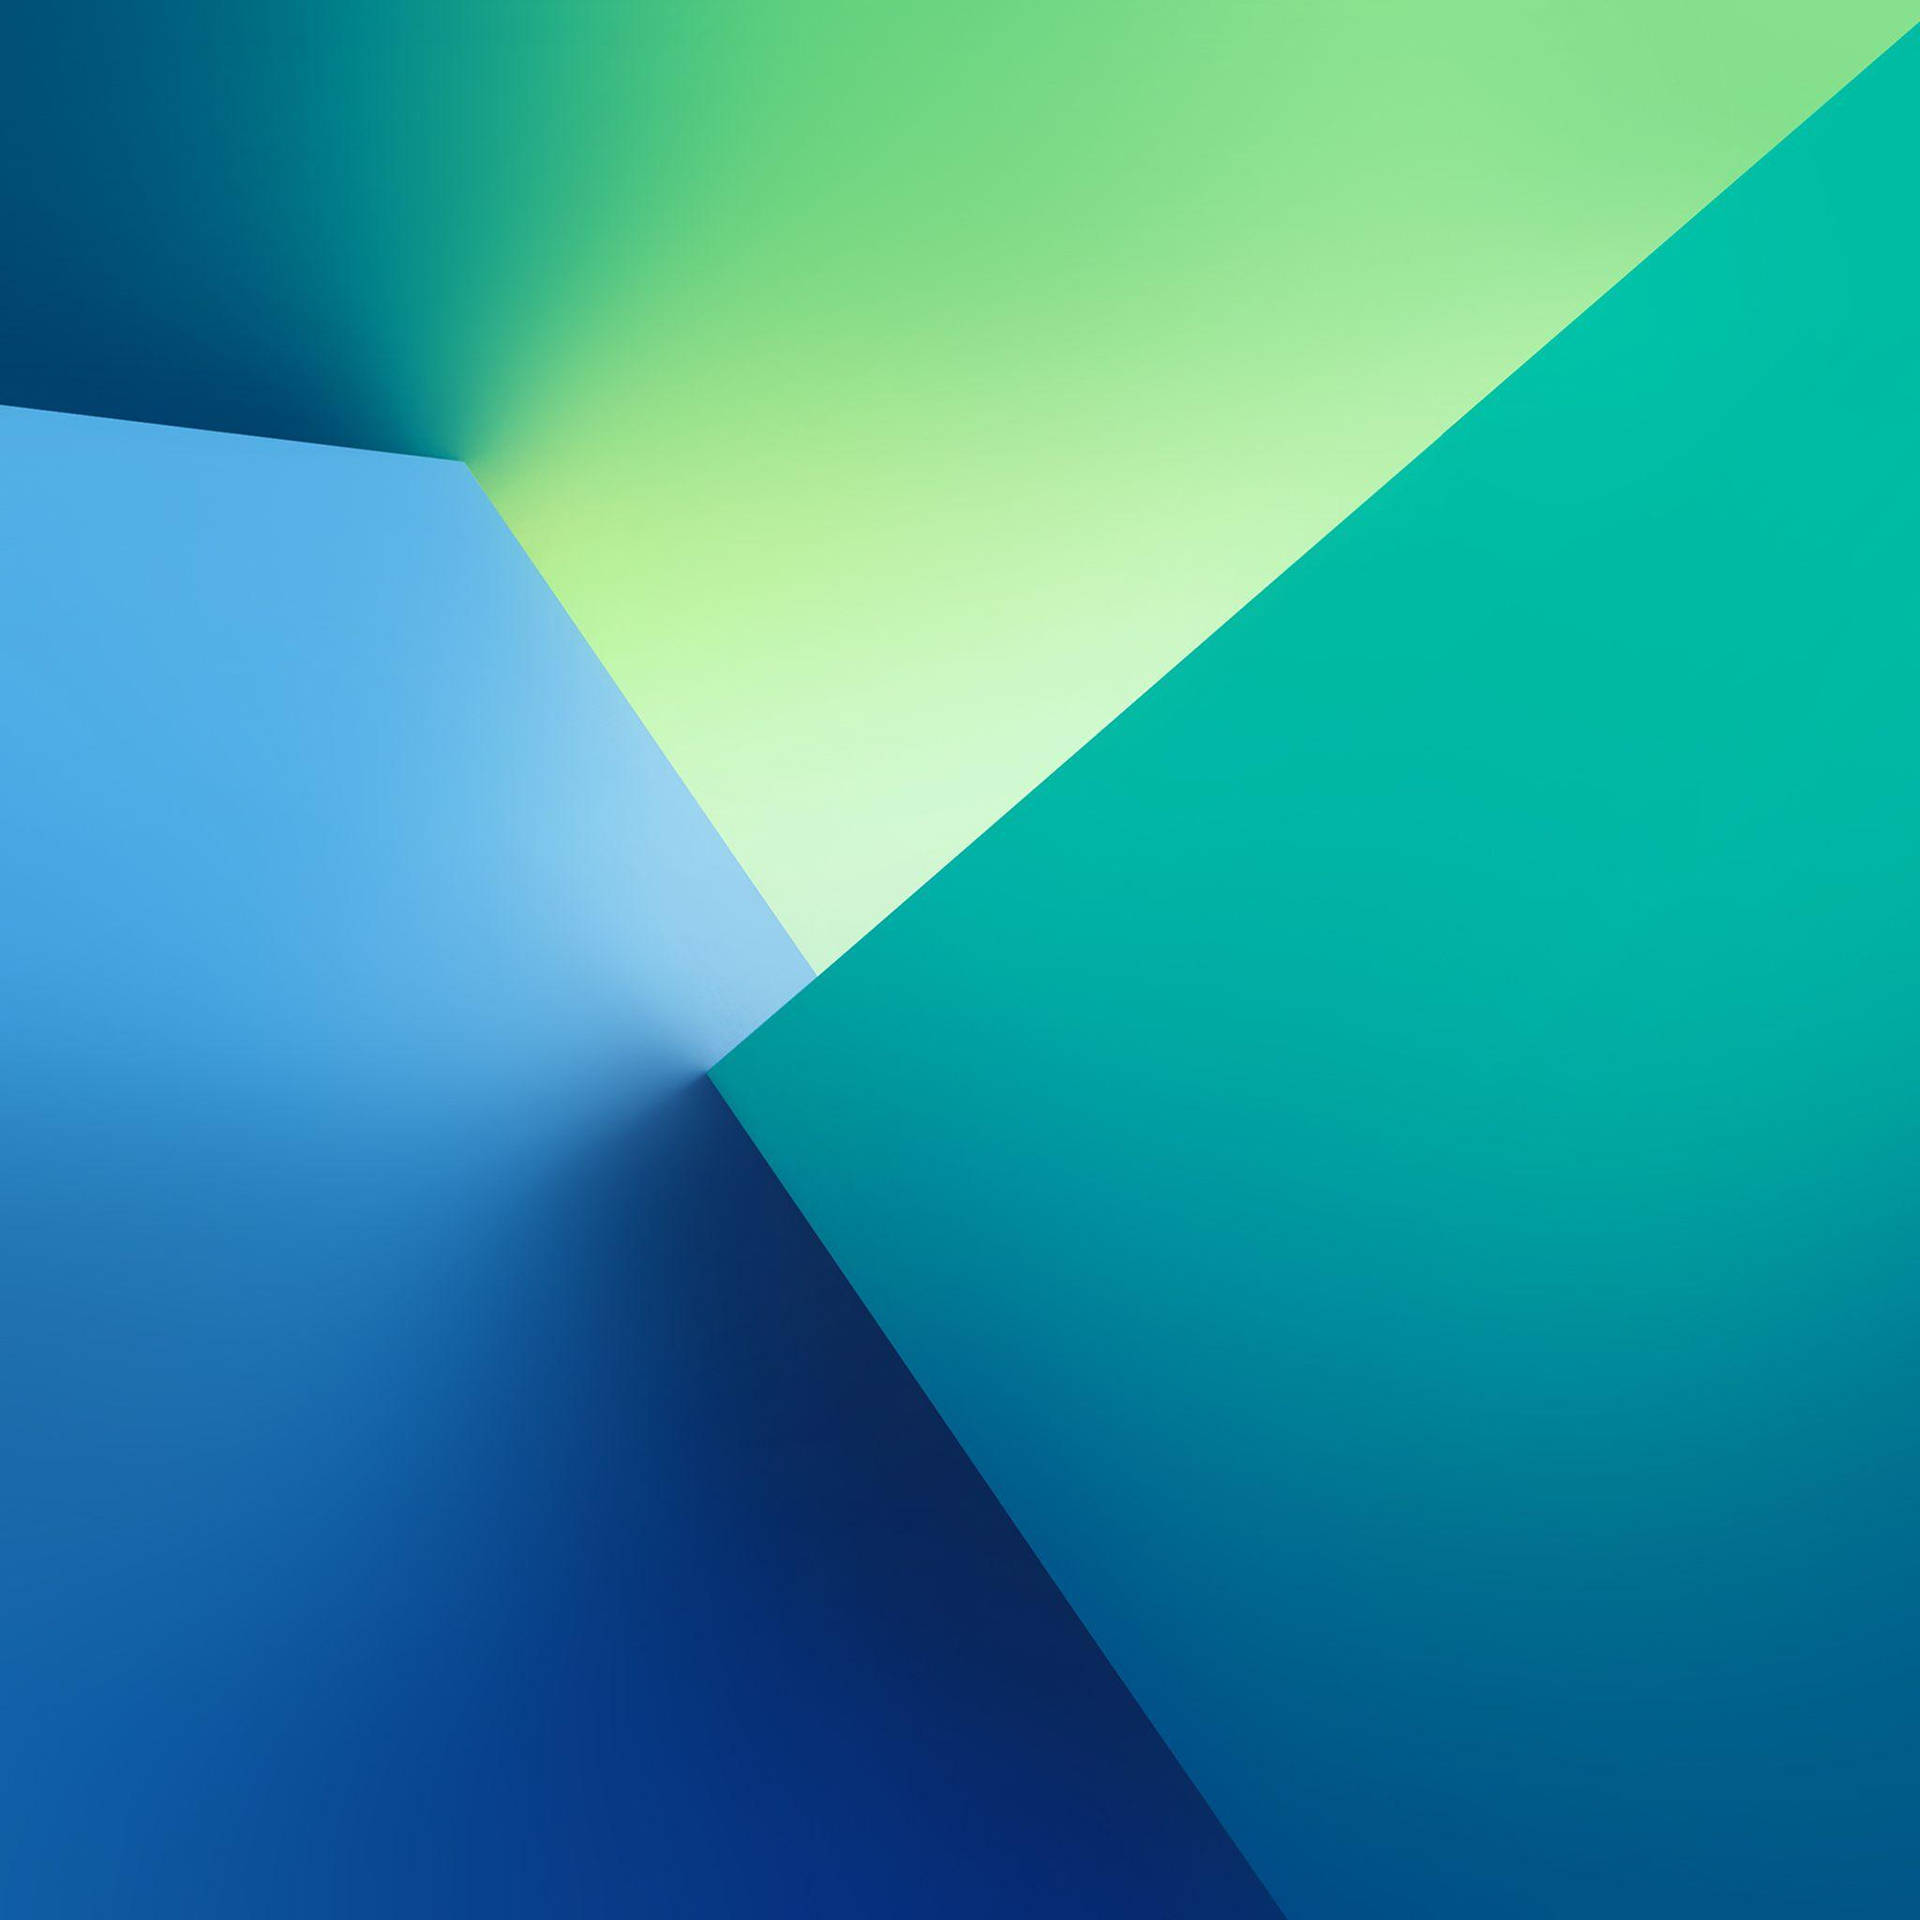 Blue And Green Squares Galaxy Tablet Wallpaper